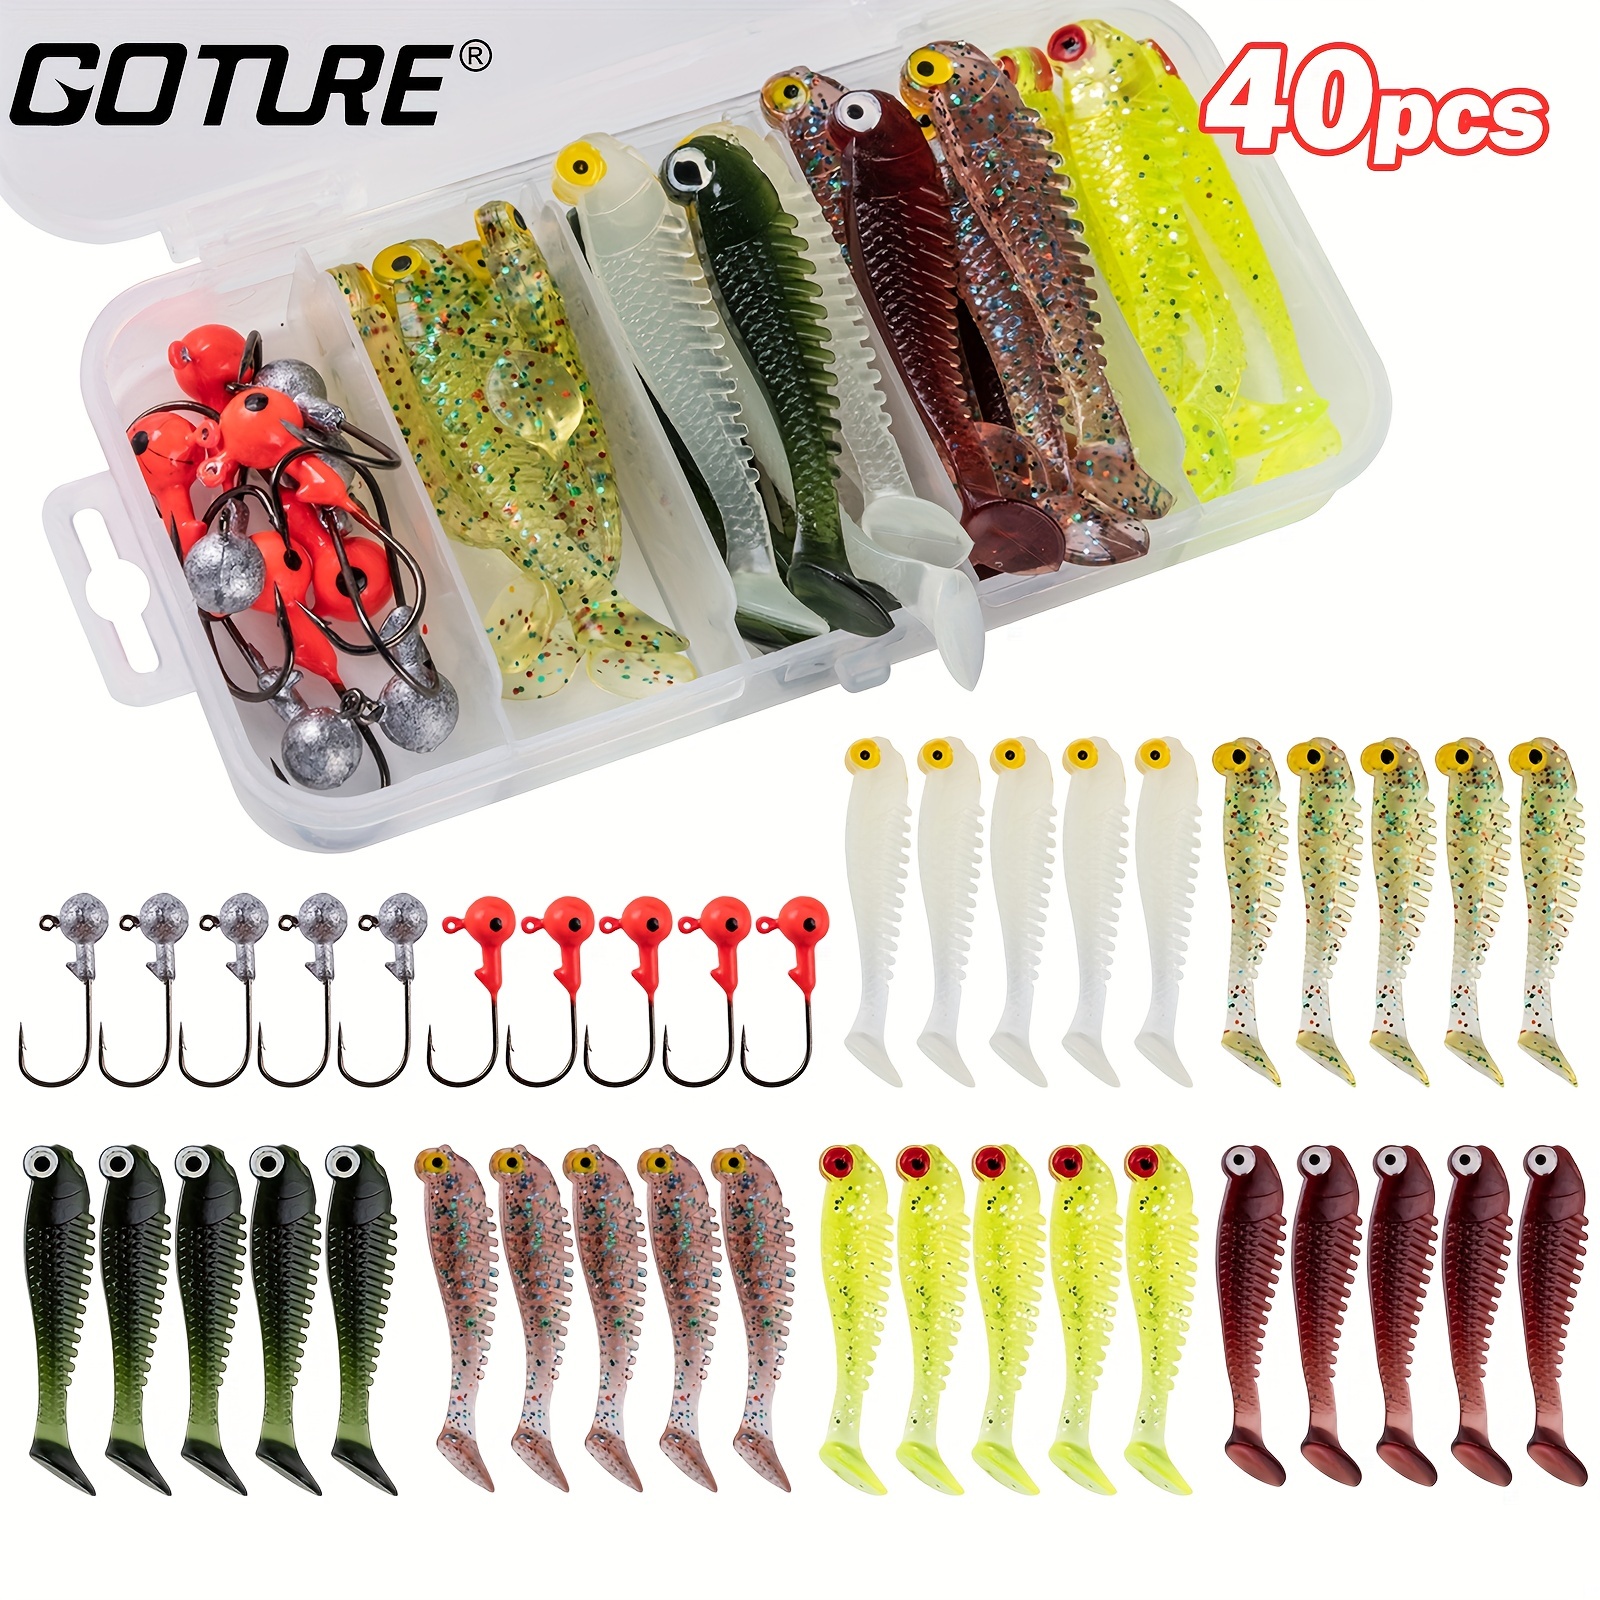 * Fishing Lure & Lead Head Jig Hook Set - Perfectly Tackled!